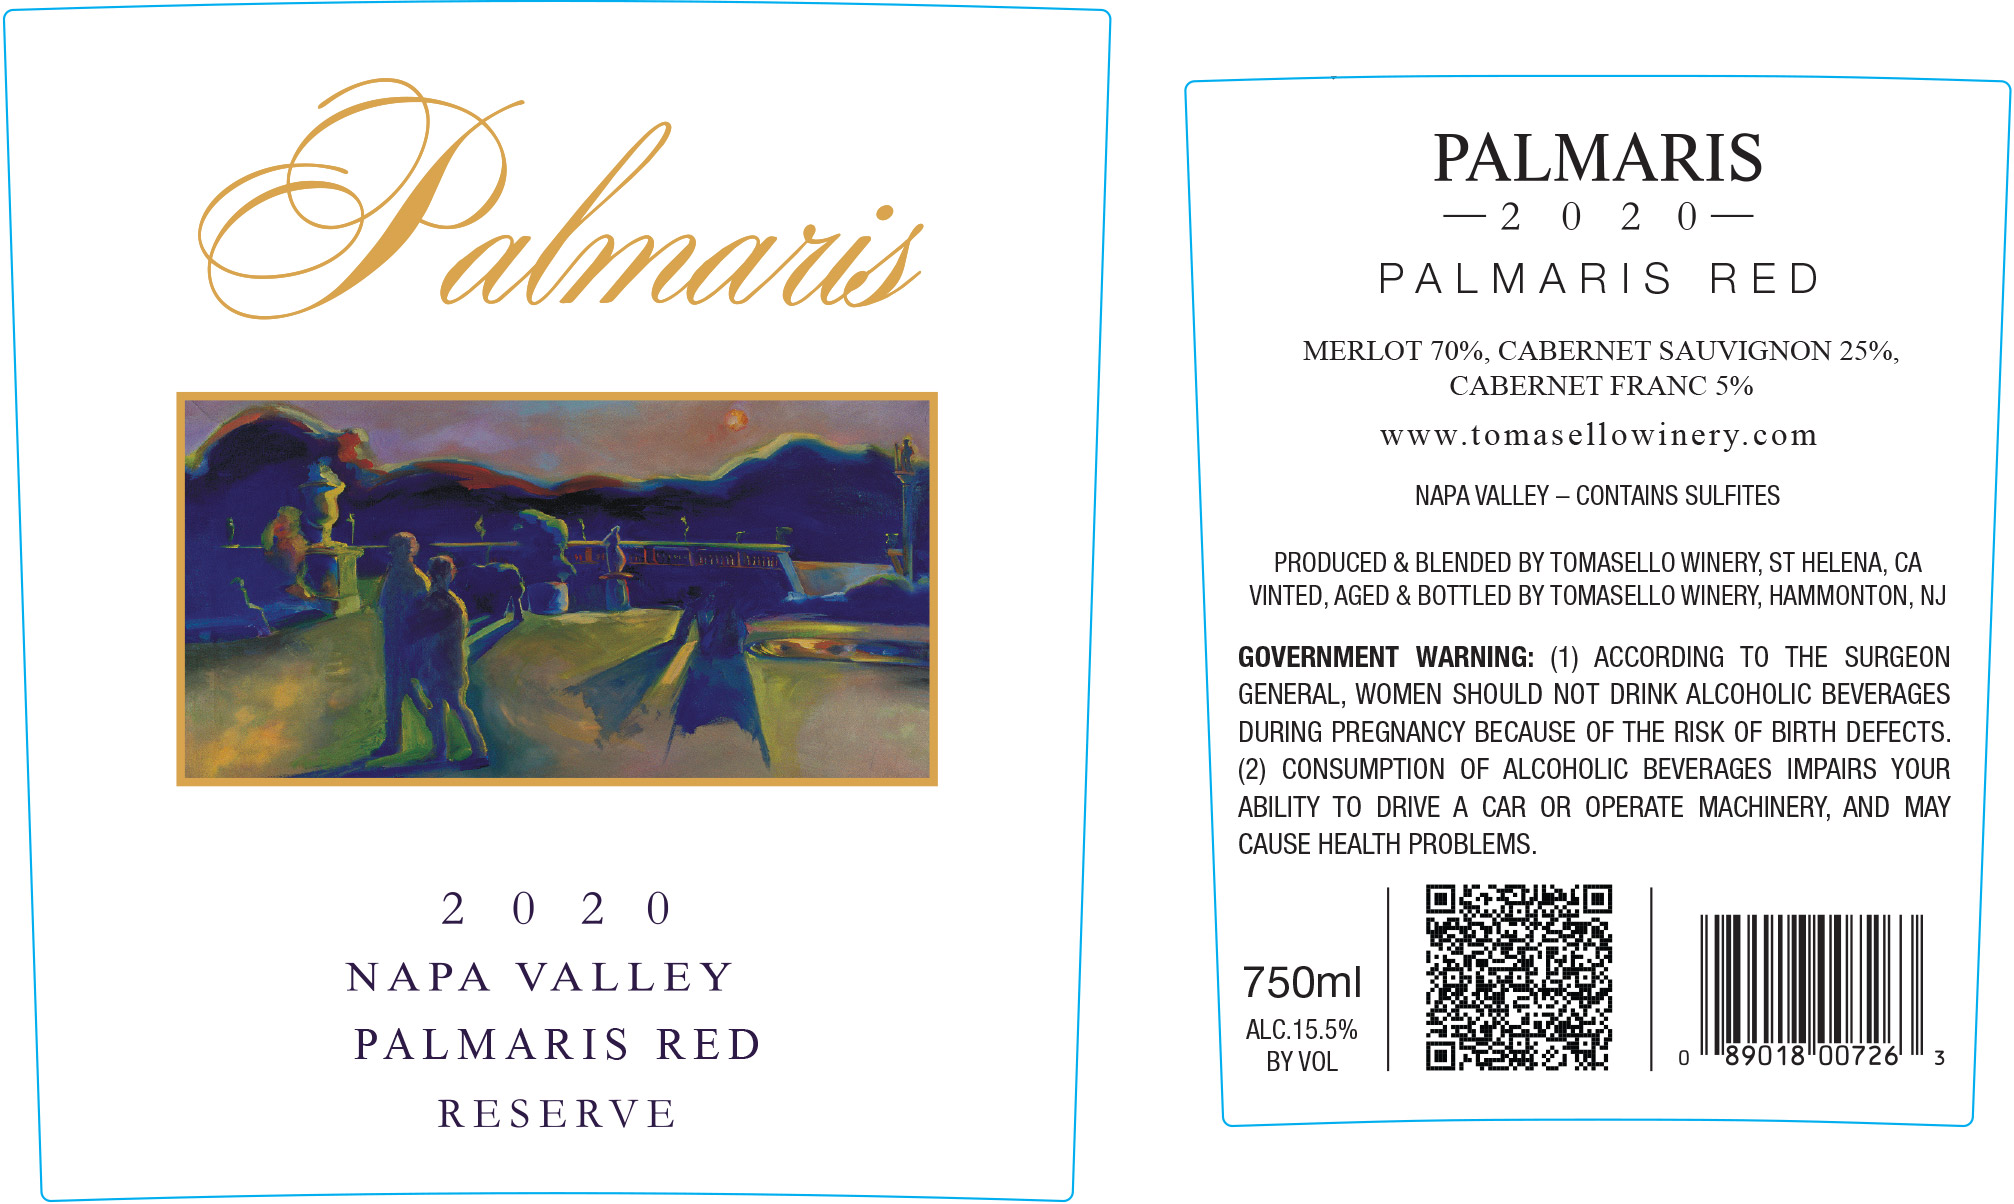 Product Image for 2020 Palmaris Napa Valley Palmaris Red Reserve